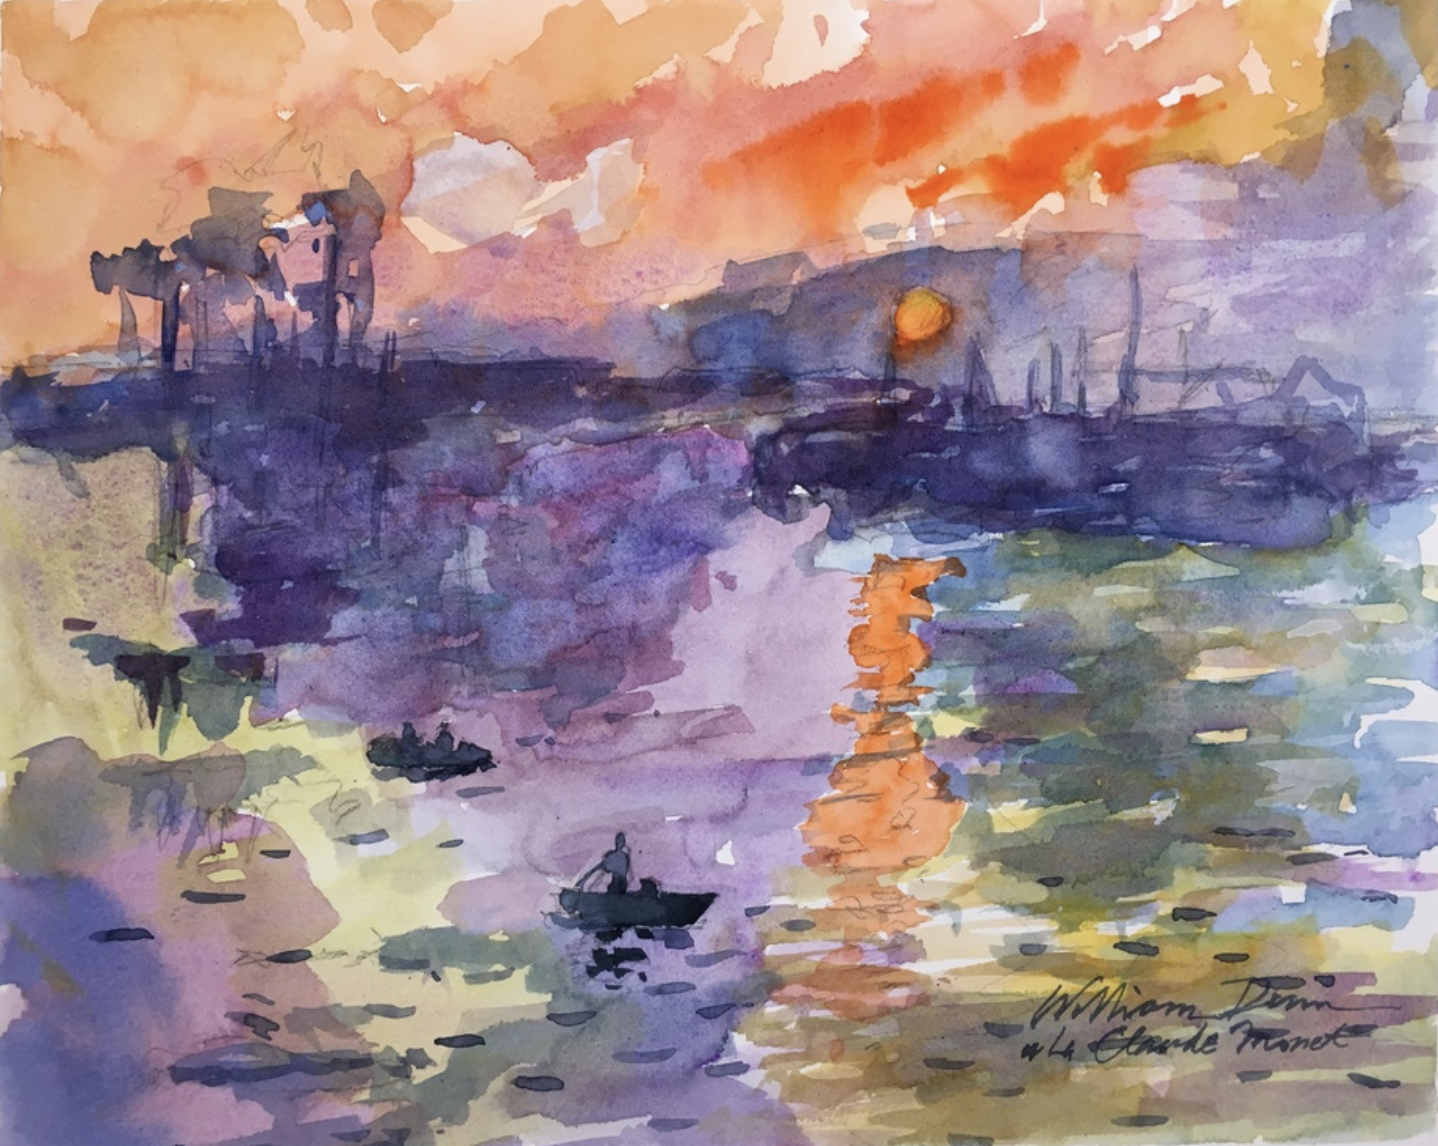 Watercolor Techniques For Copying A Famous Sunrise Painting By Monet